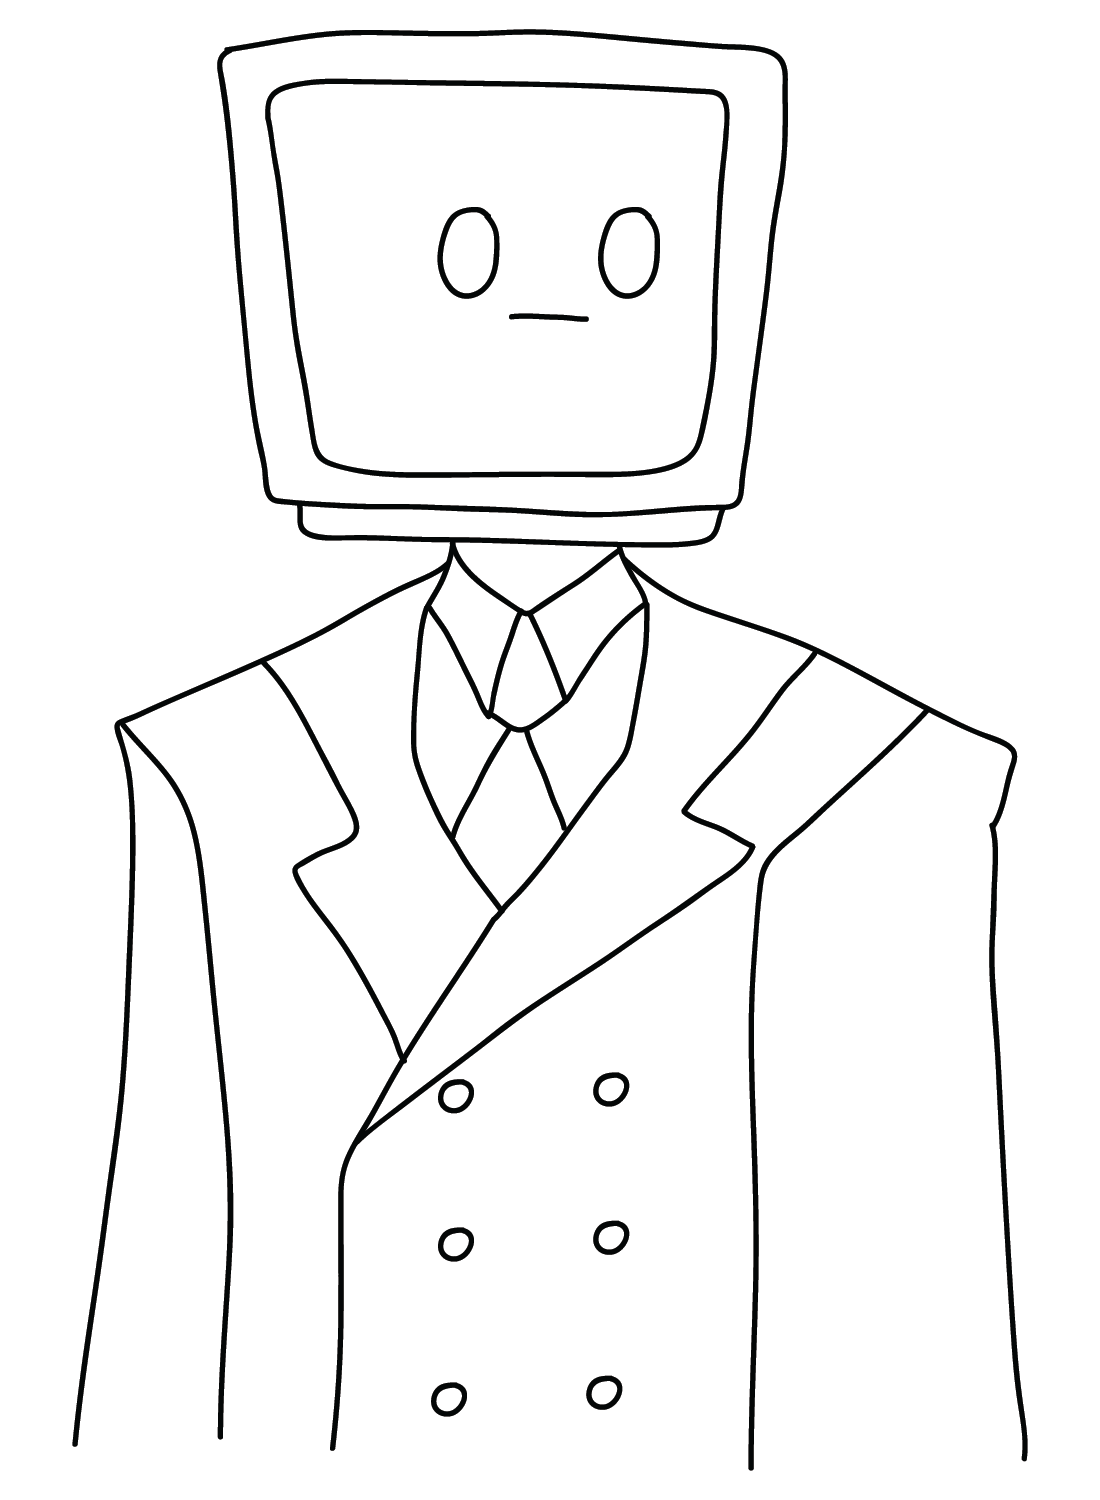 TV Man Coloring Pages - Free Printable Coloring Pages